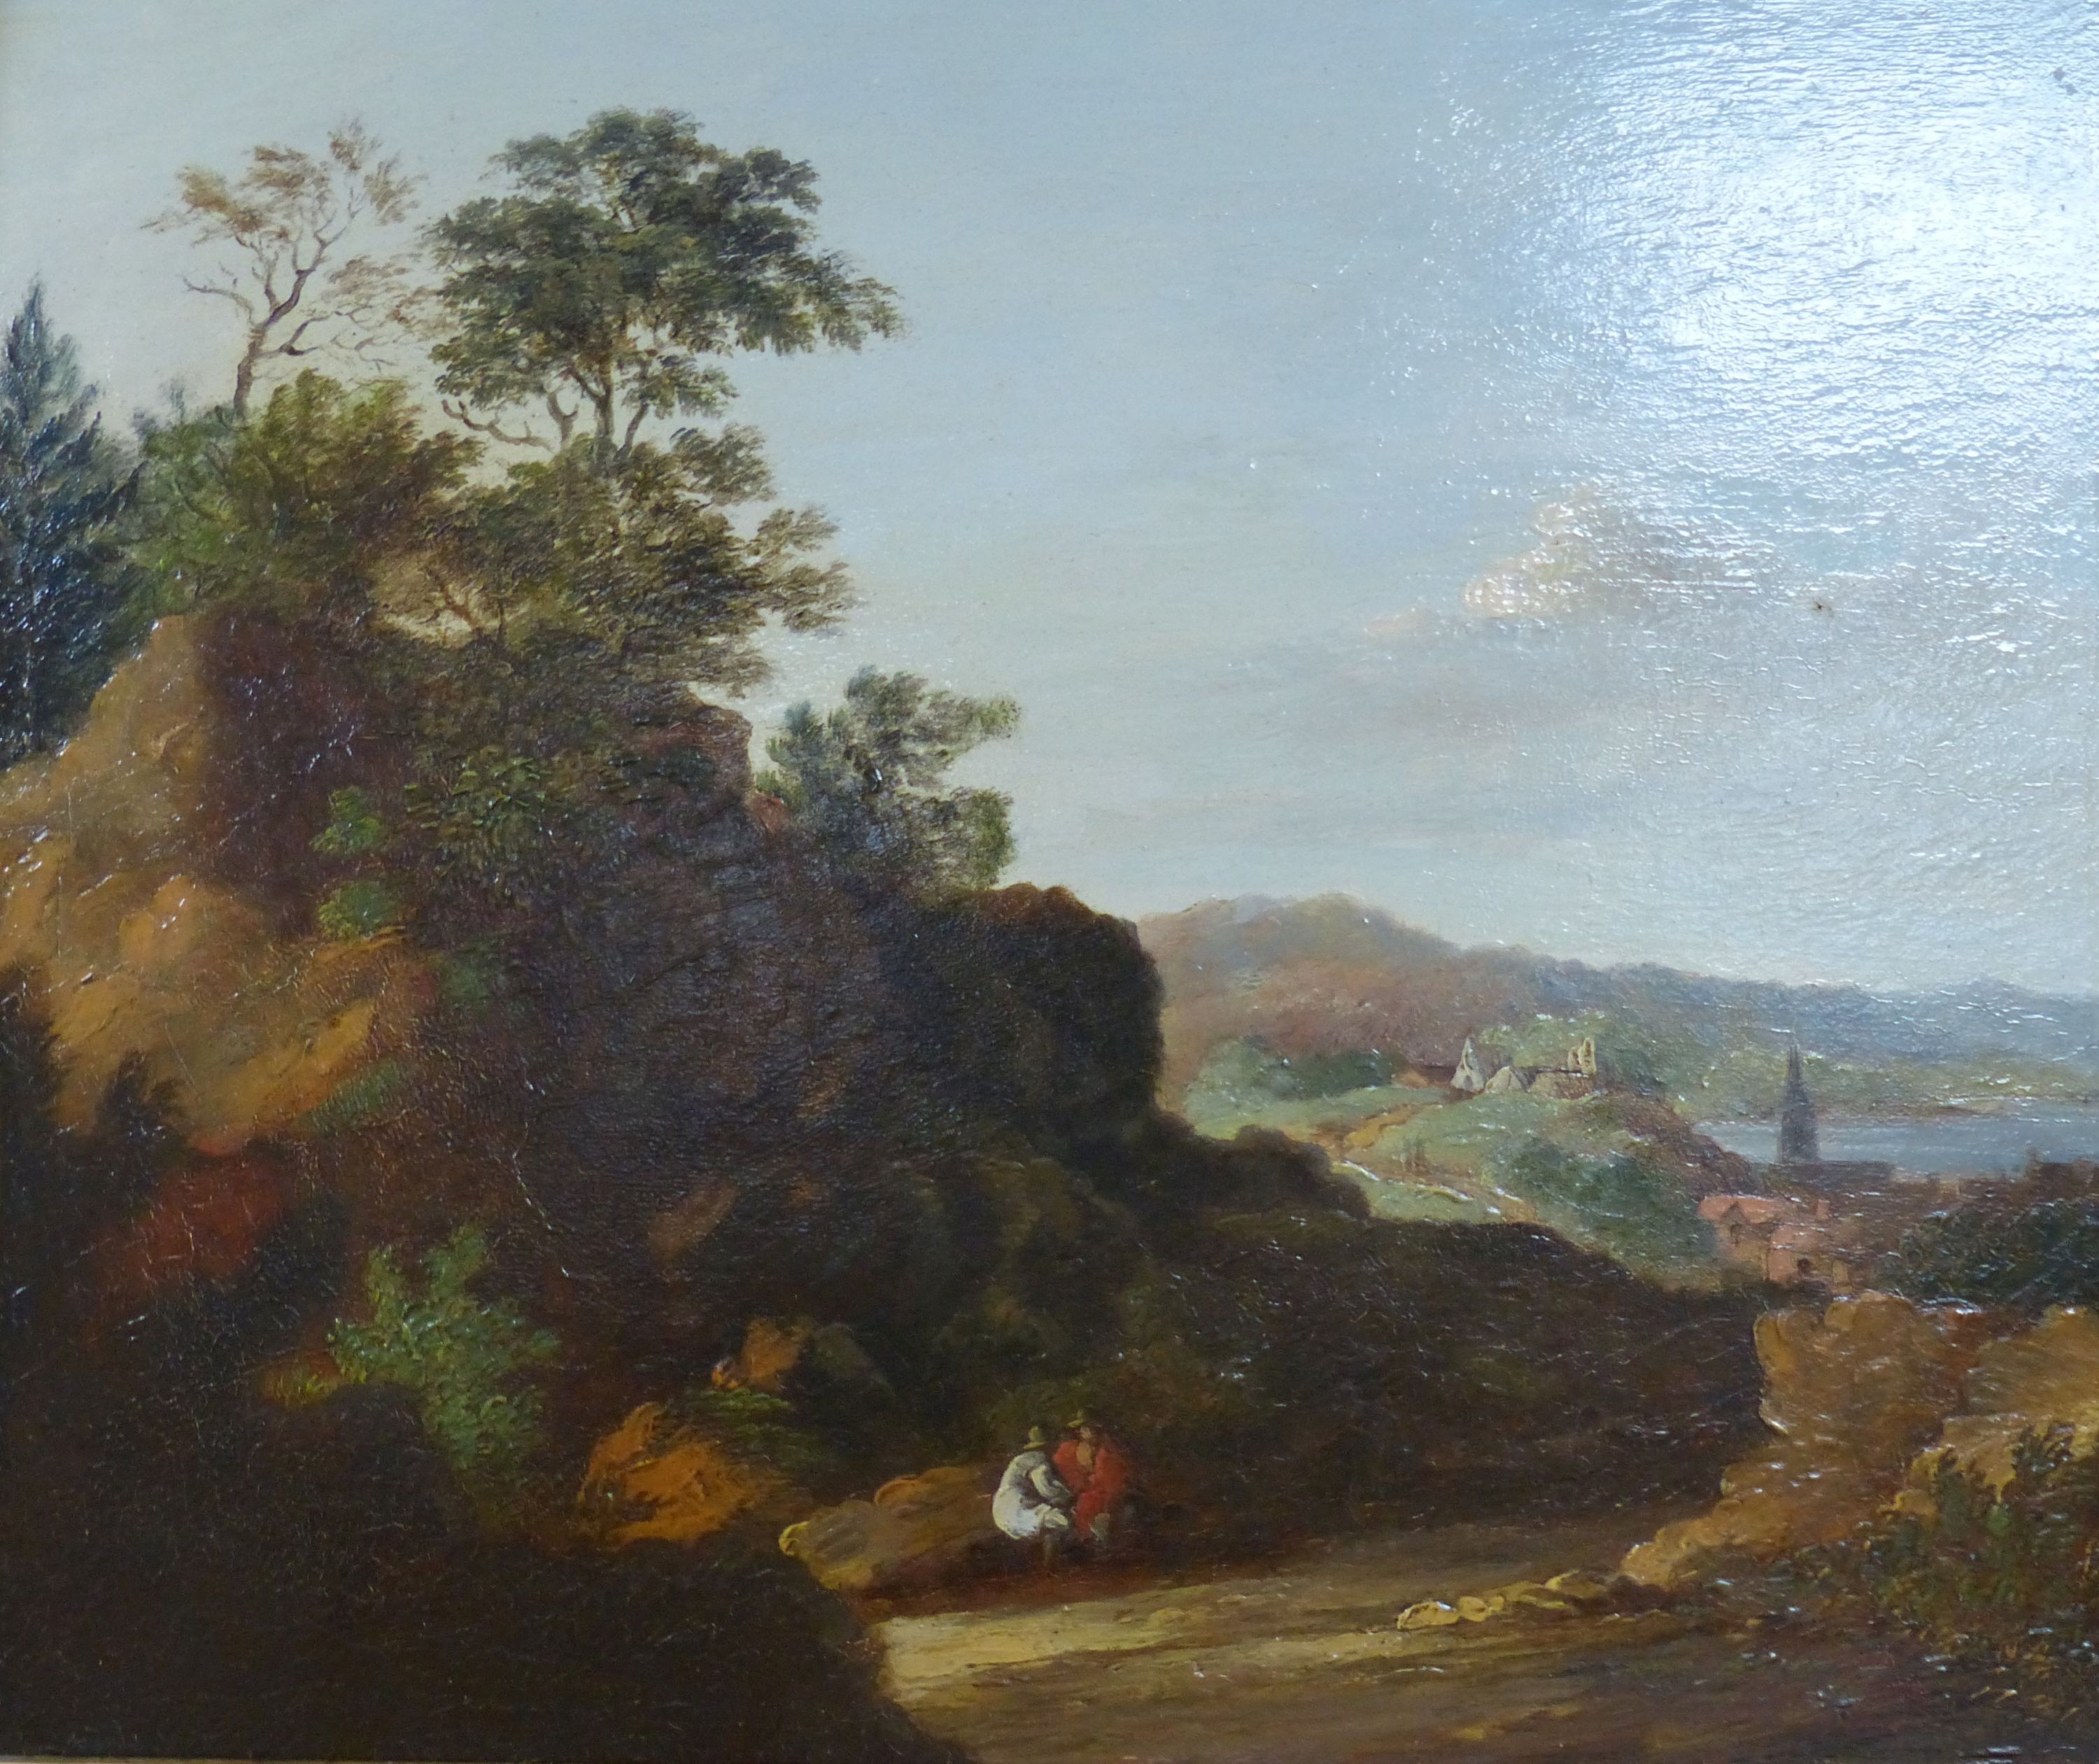 19th century English School, oil on wooden panel, Figures in a landscape, 26 x 31cm